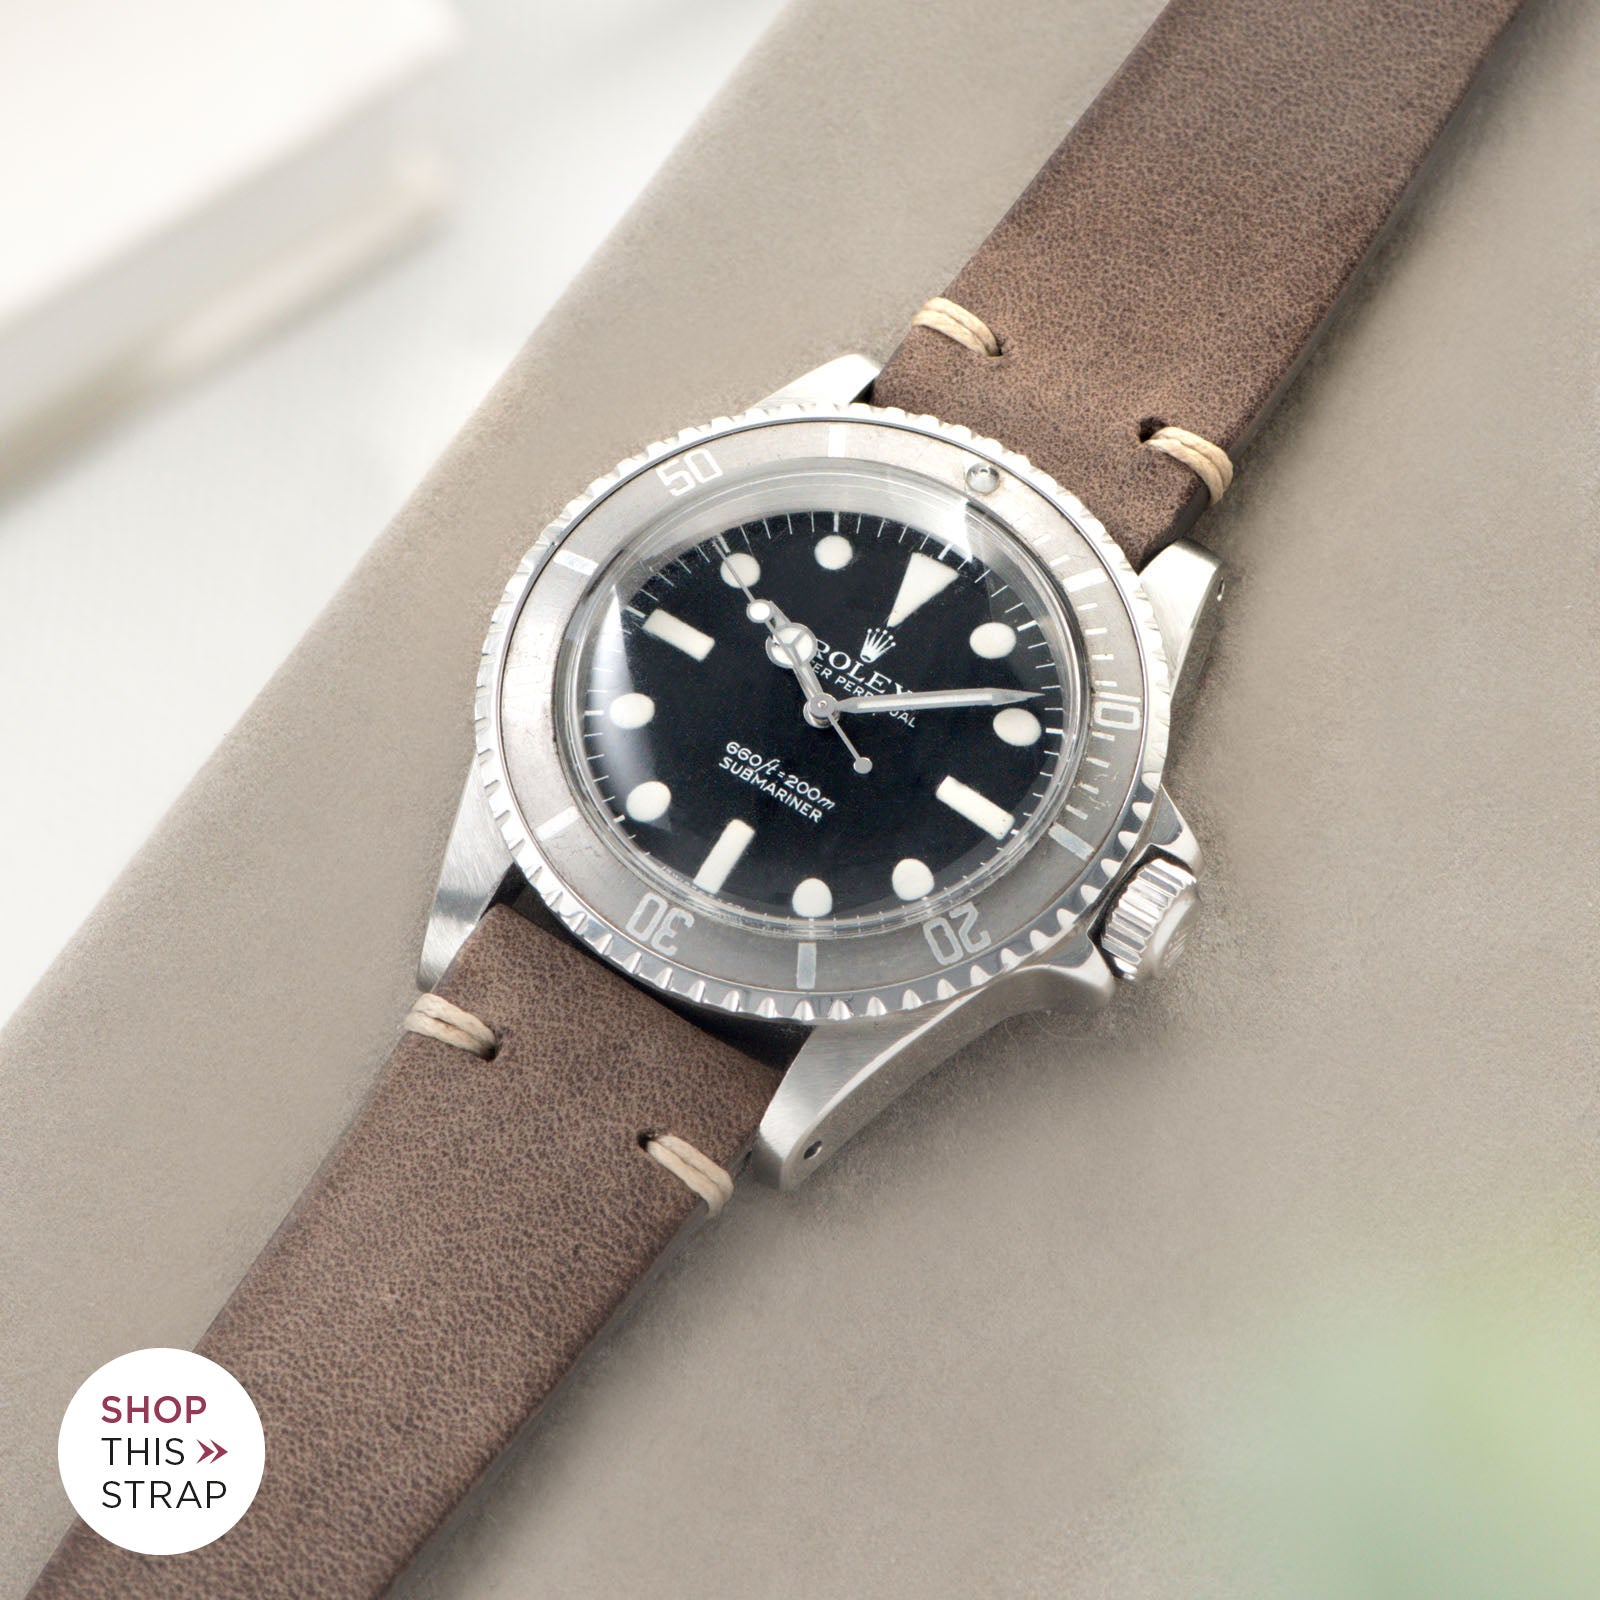 Bulang and Sons_Strap Guide_The Rolex 5513 Faded Maxi Submariner_Smoke Grey Leather Watch Strap